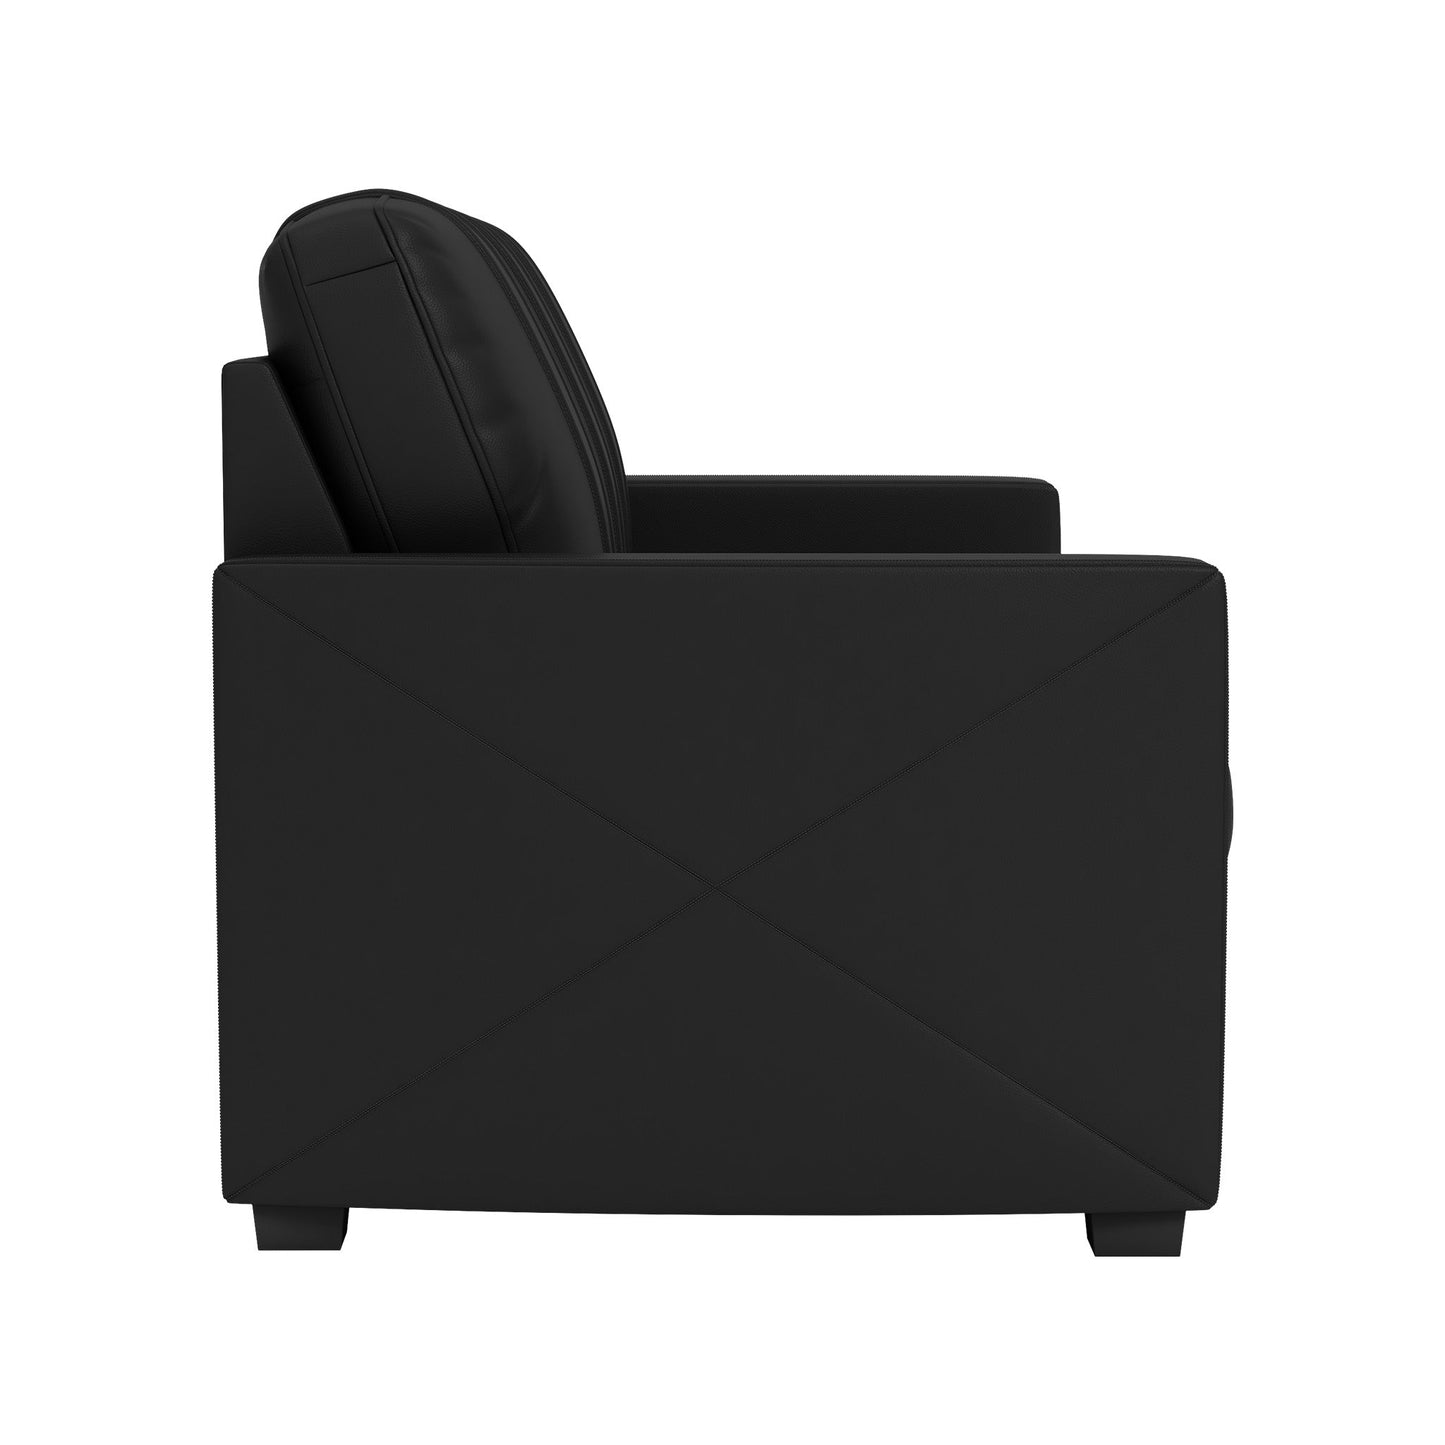 Stationary Sofa Commercial Grade Black Upholstery Without Logo